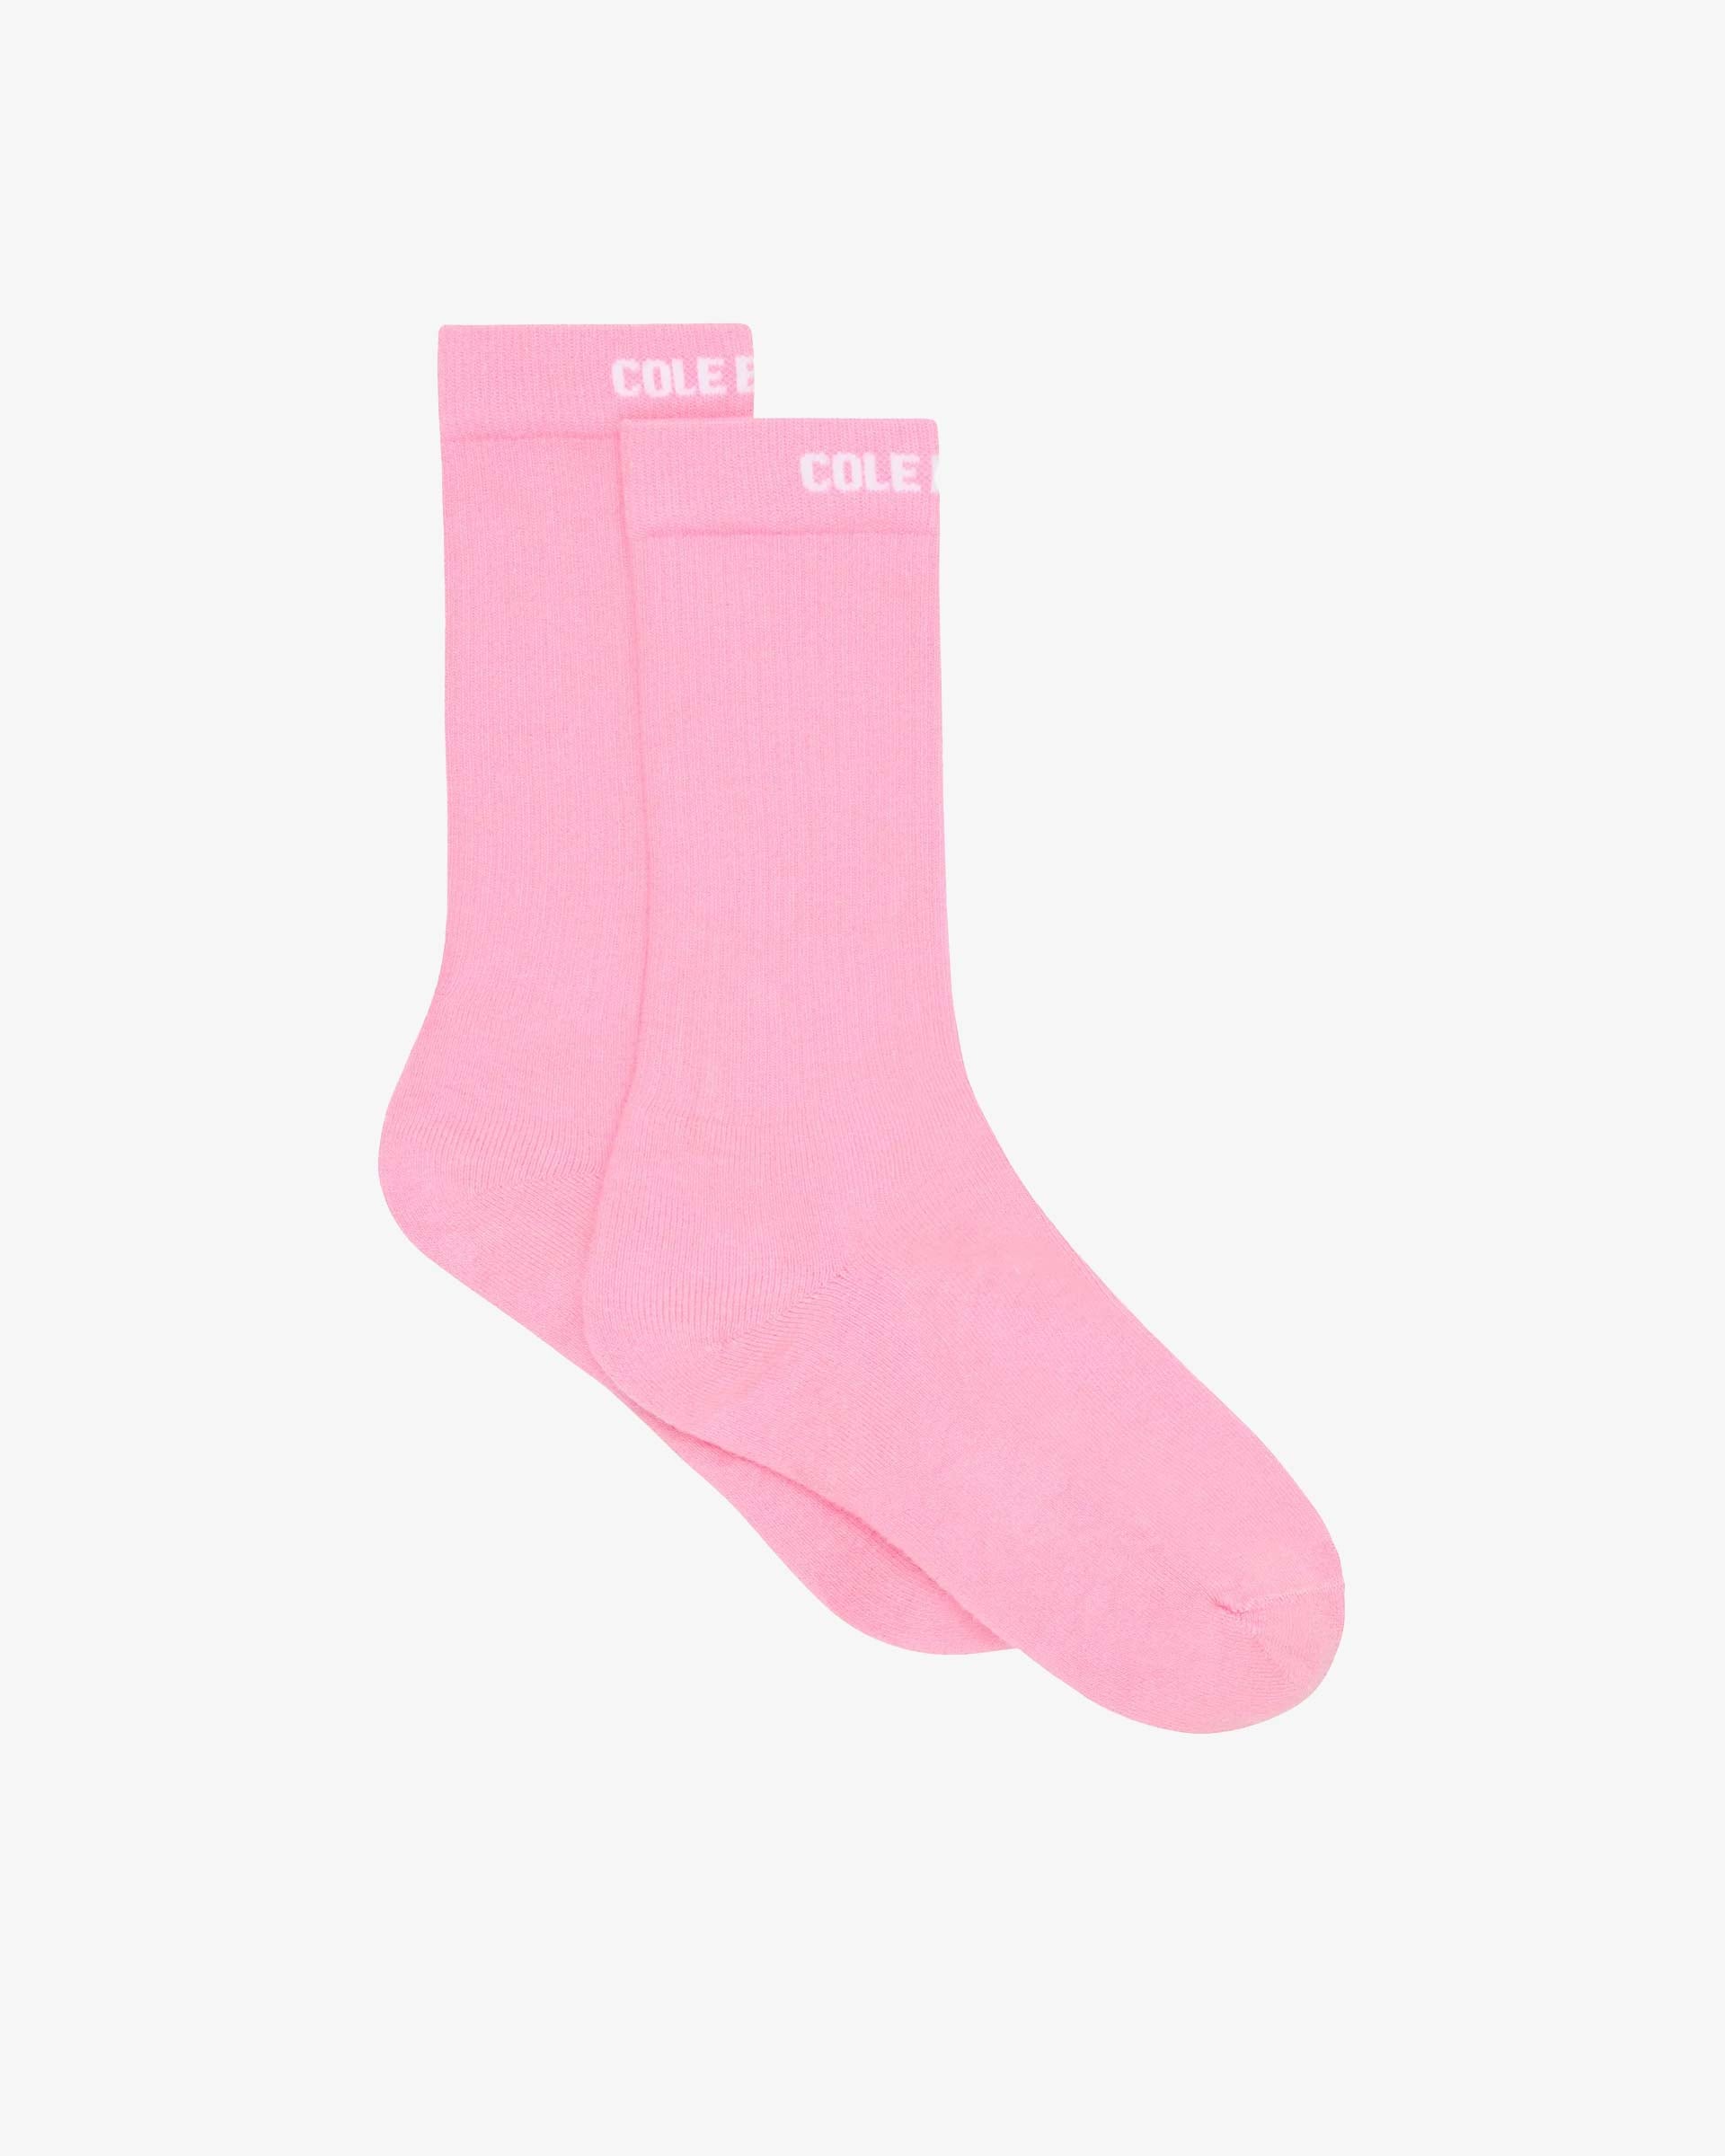 Cole Buxton | Sports Socks | One Size Fits All | Cotton | Pink